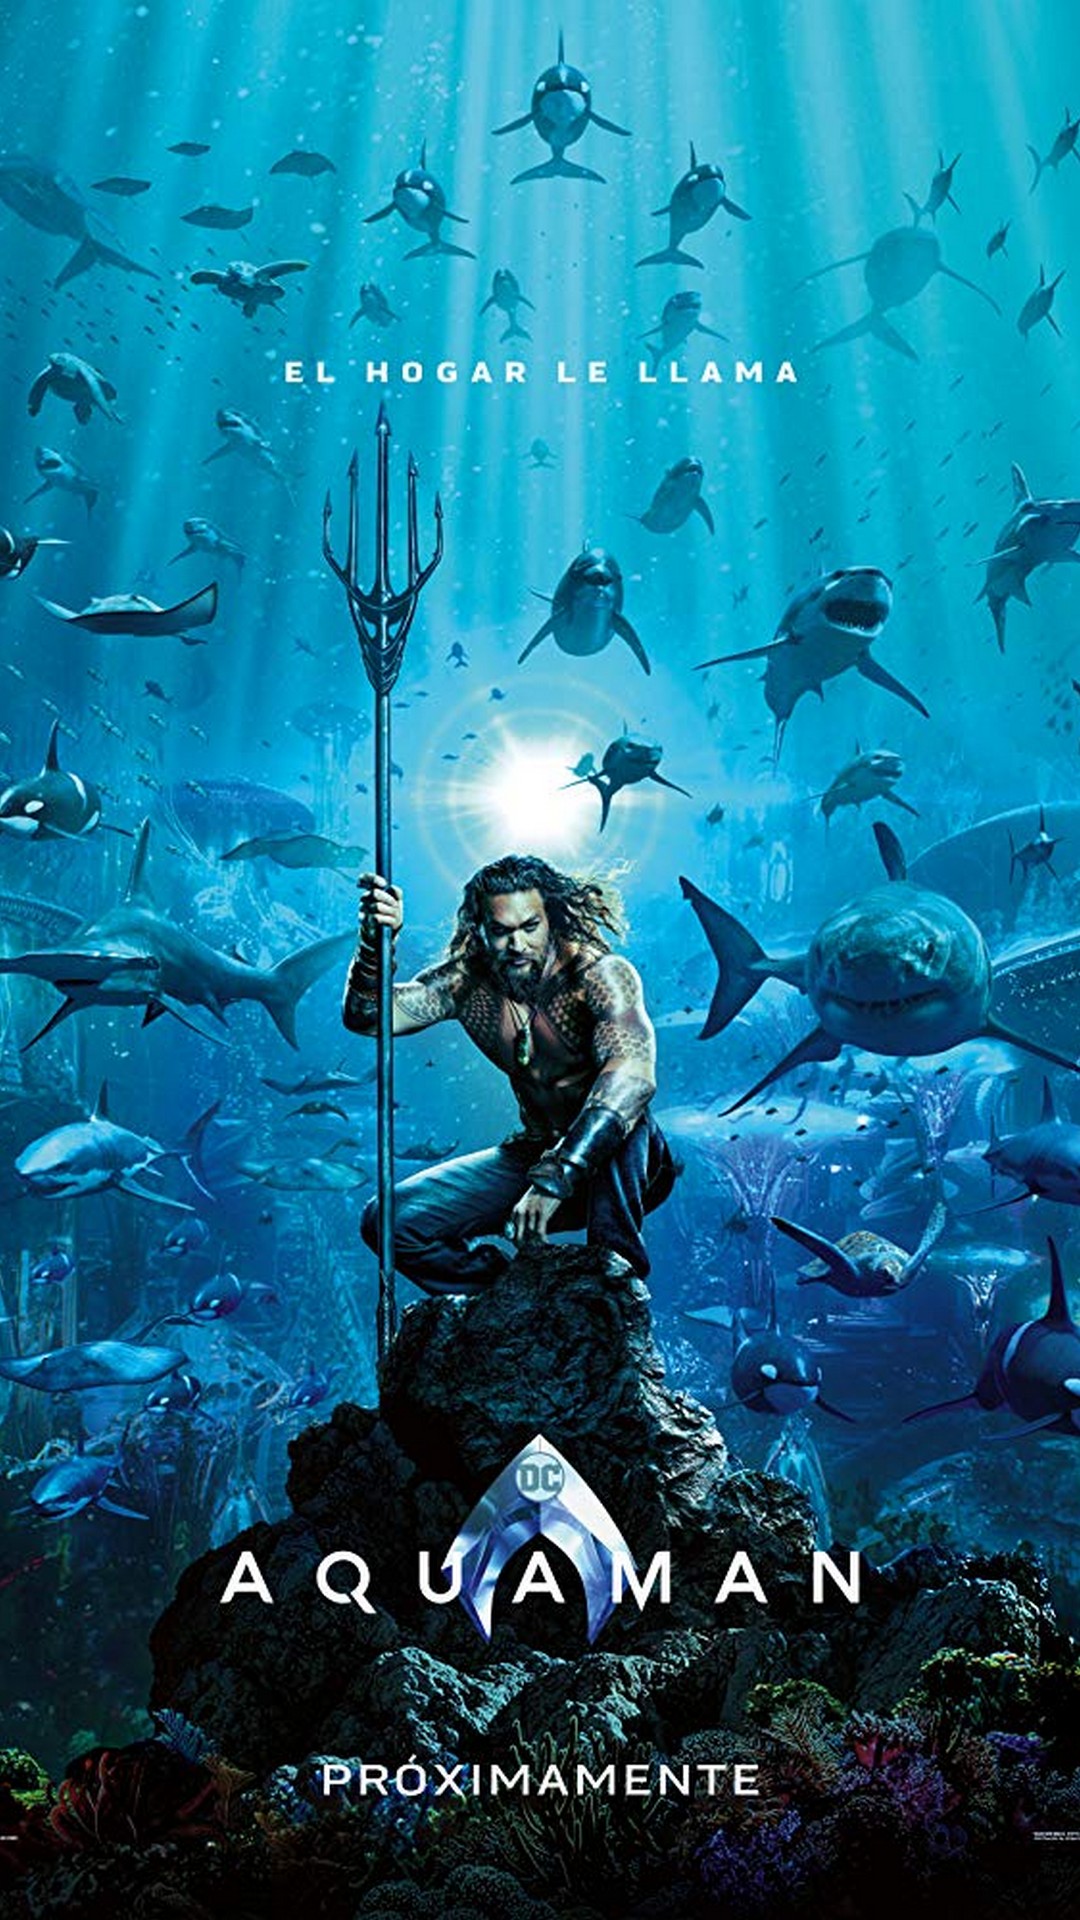 Wallpaper Aquaman iPhone with image resolution 1080x1920 pixel. You can make this wallpaper for your iPhone 5, 6, 7, 8, X backgrounds, Mobile Screensaver, or iPad Lock Screen